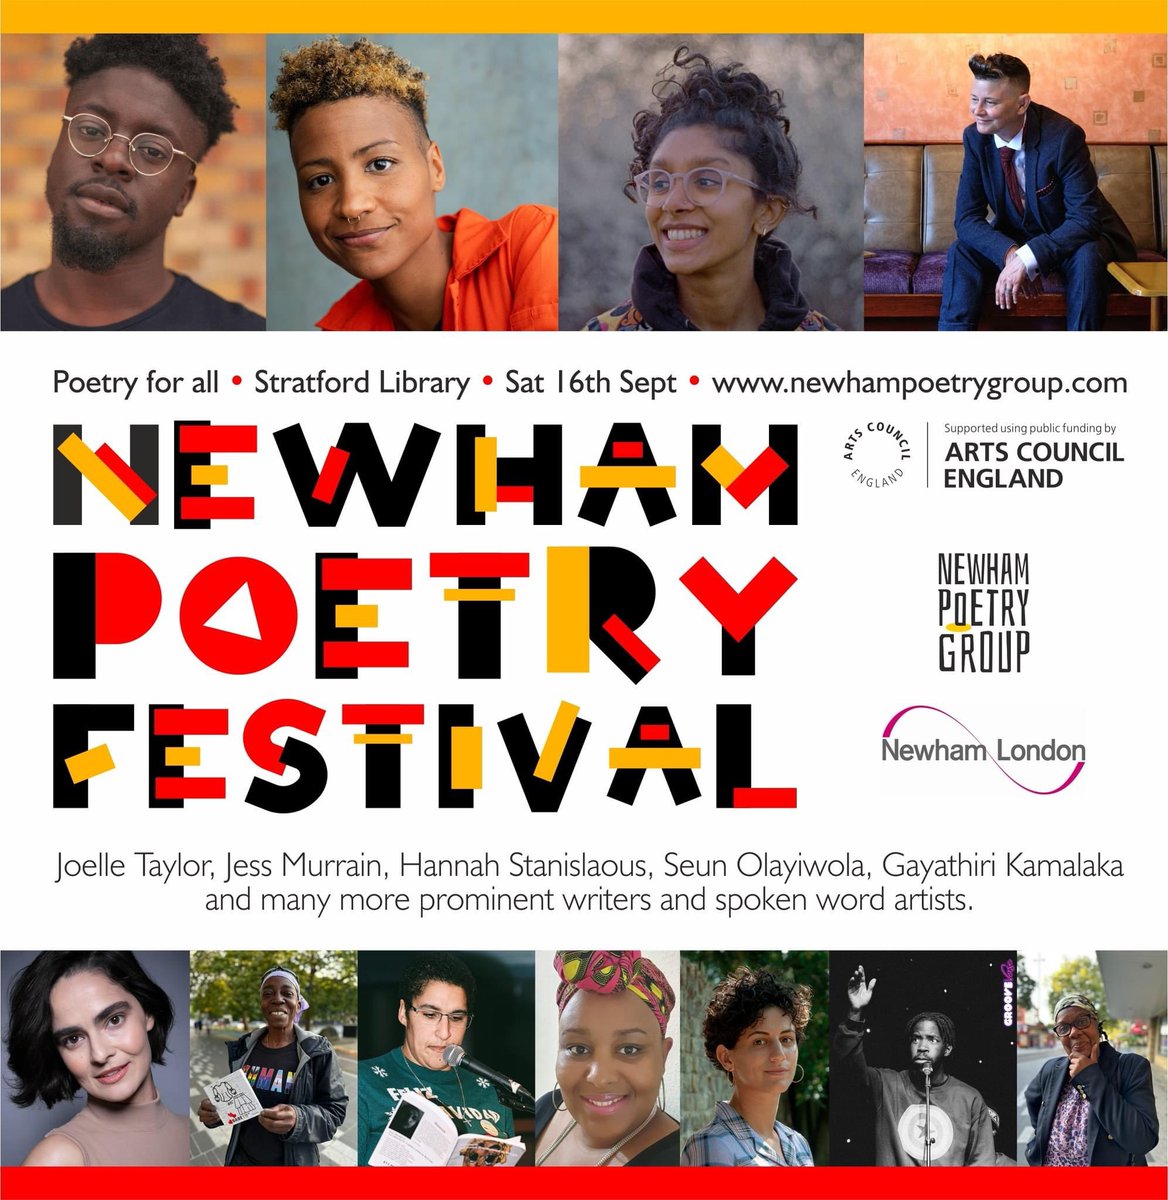 Today is the the Day #NewhamPoetryFestival 6 hours of poetry! #poetryfest #poetrymarathon #poetryforall StratfordLibrary 1-7.30pm